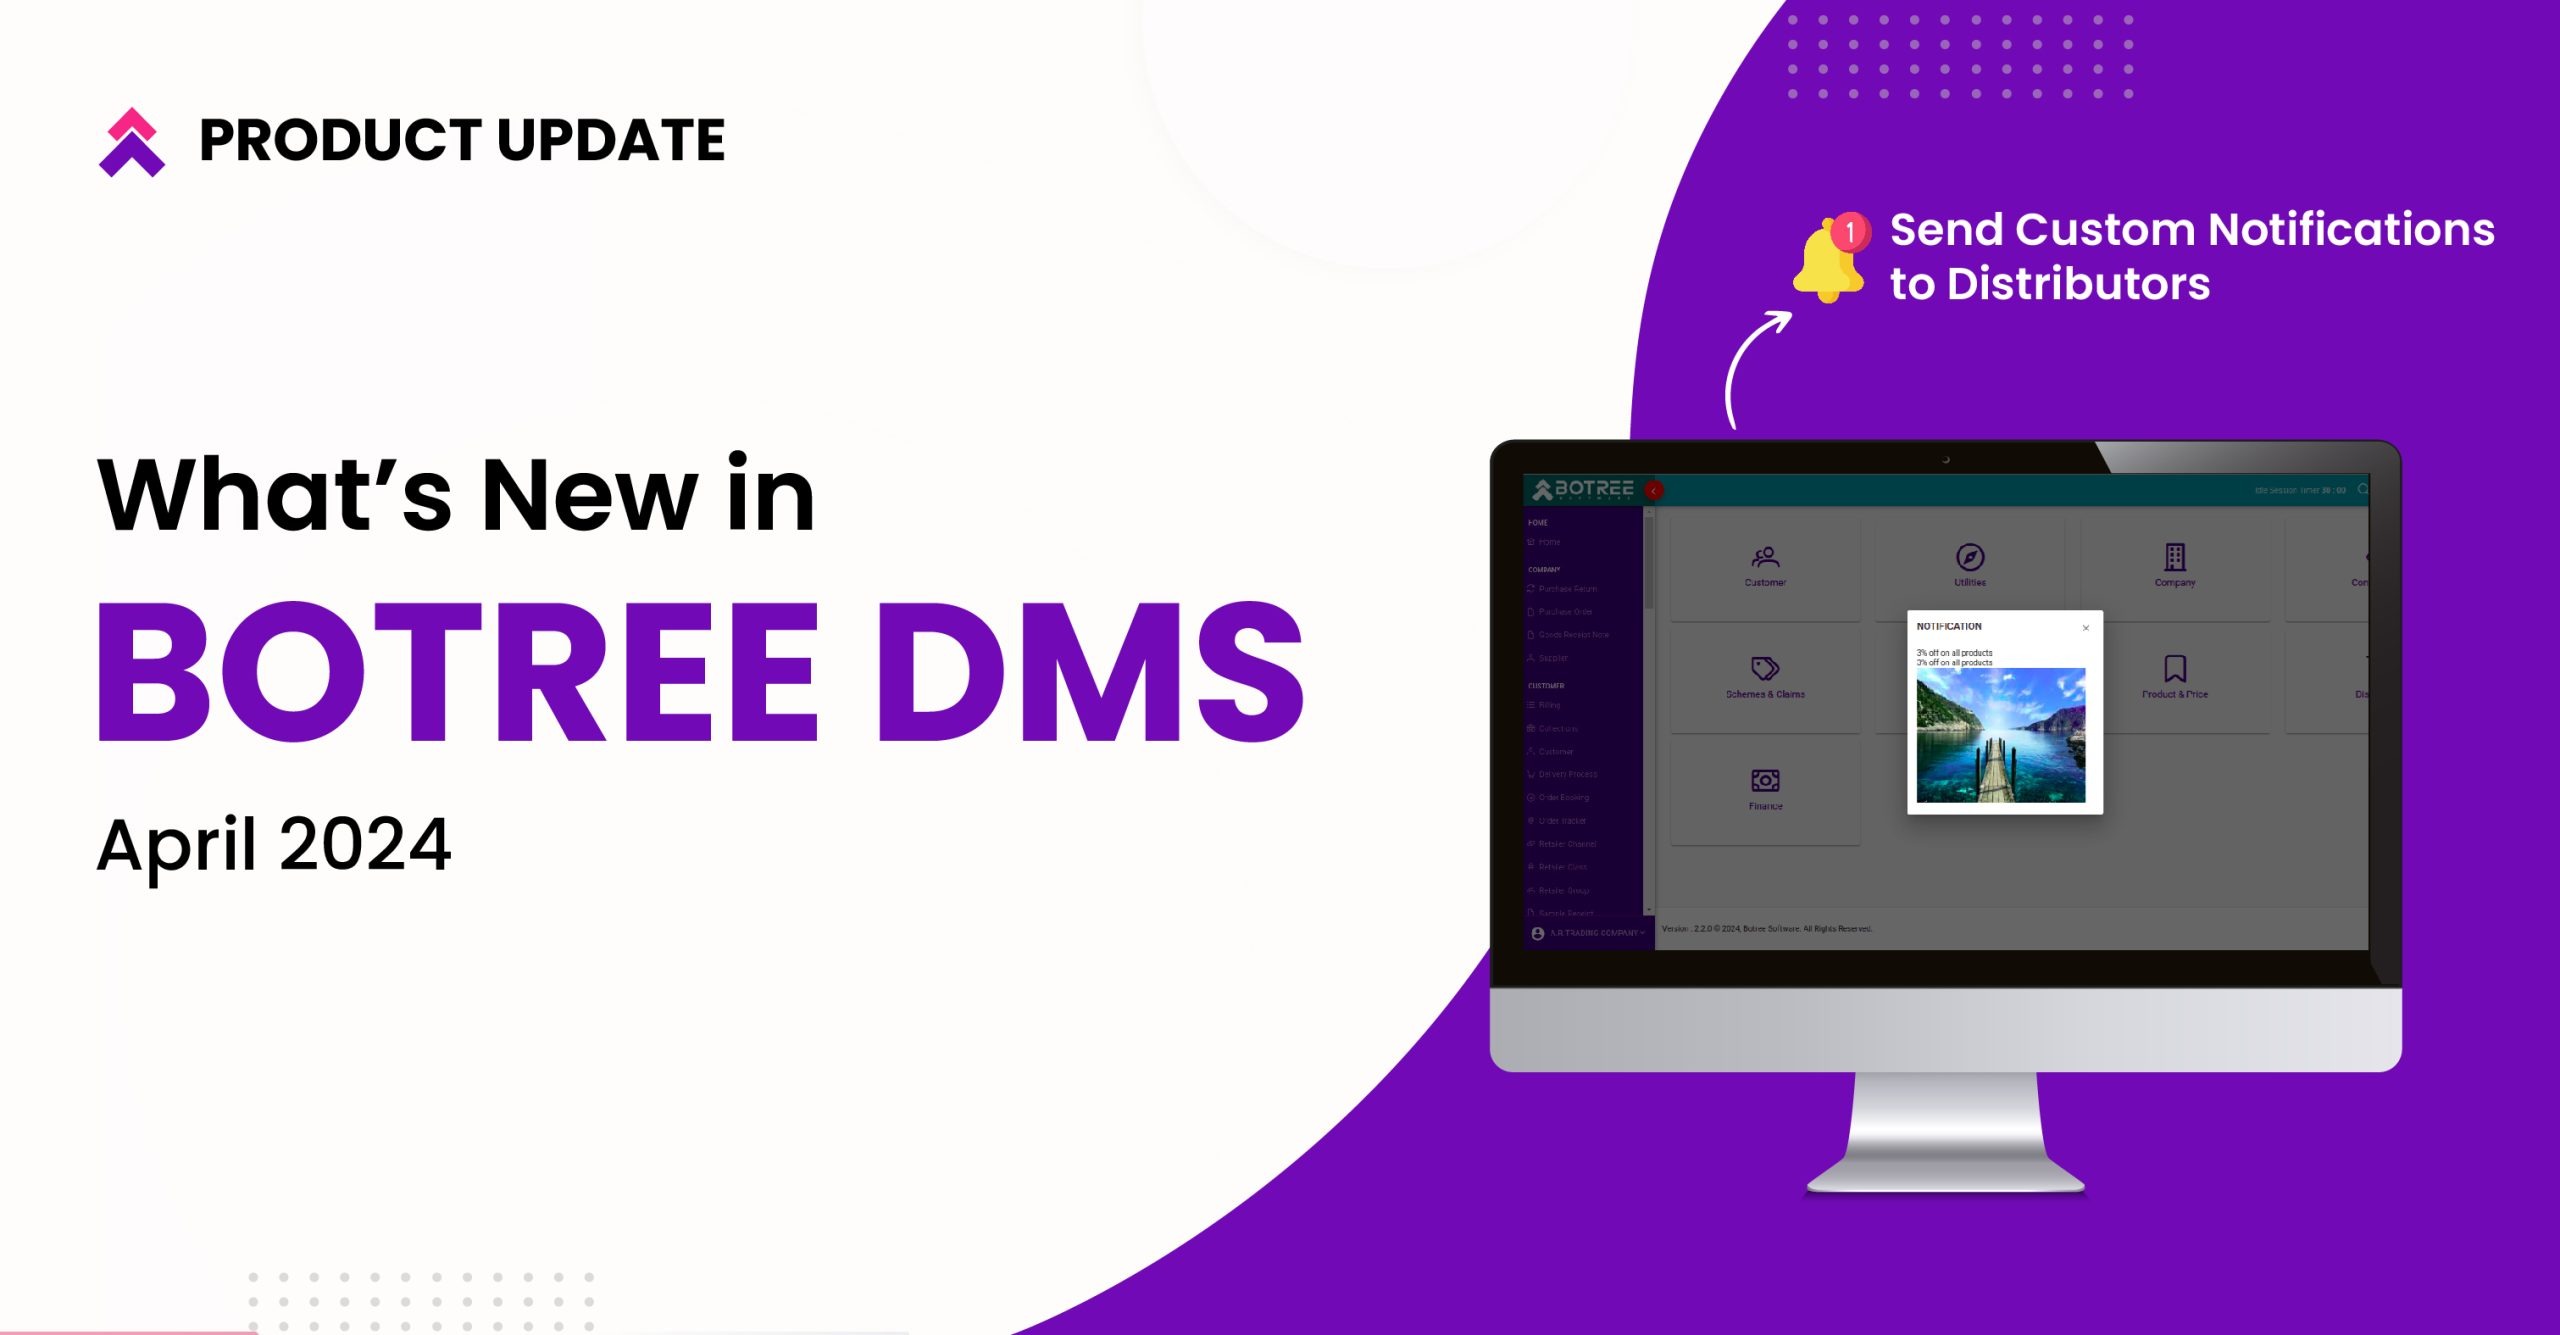 what's new in botree dms